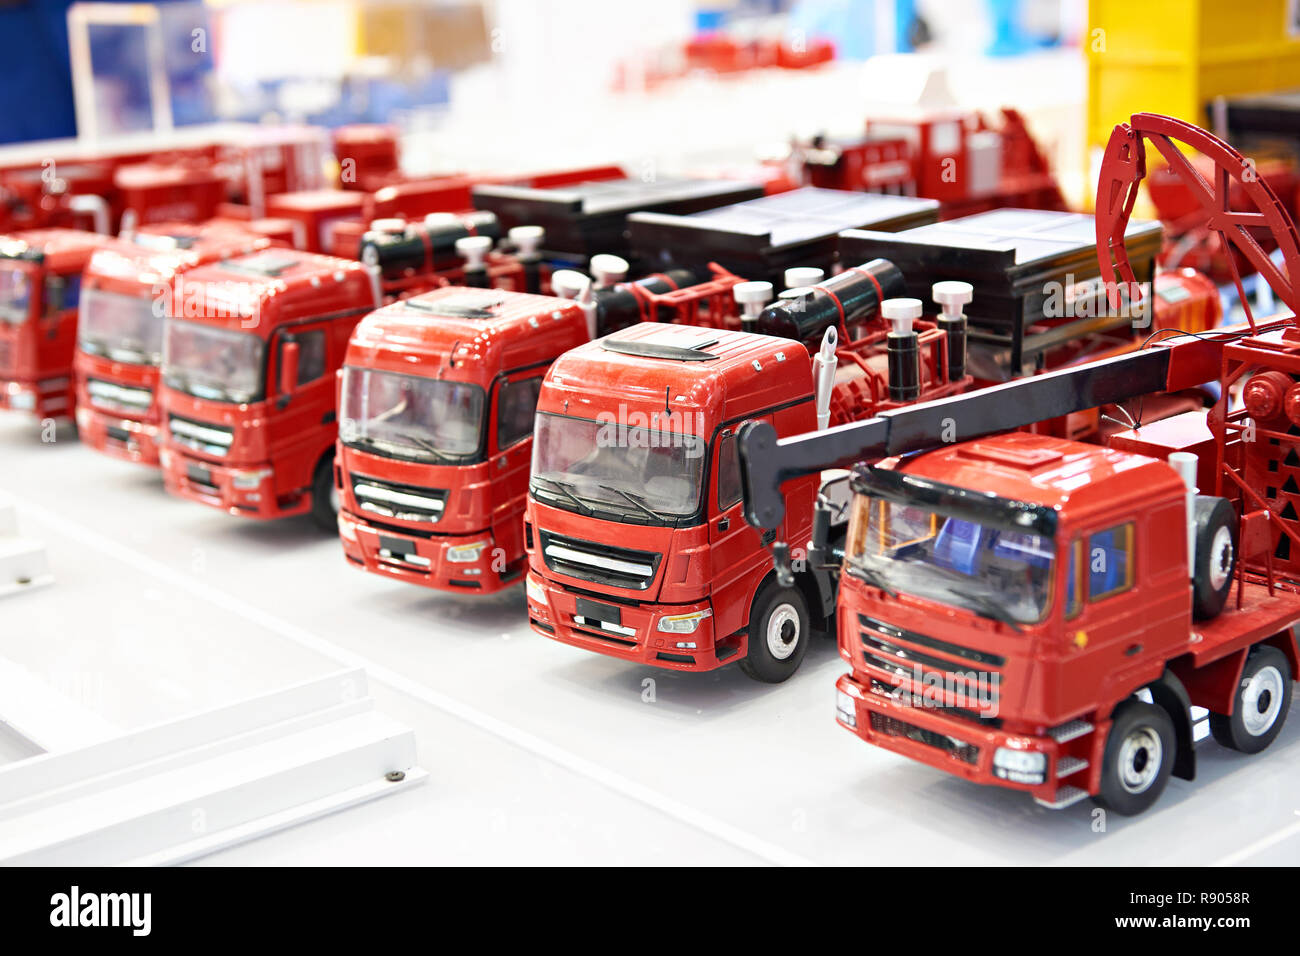 Toy models of trucks with industrial equipment Stock Photo